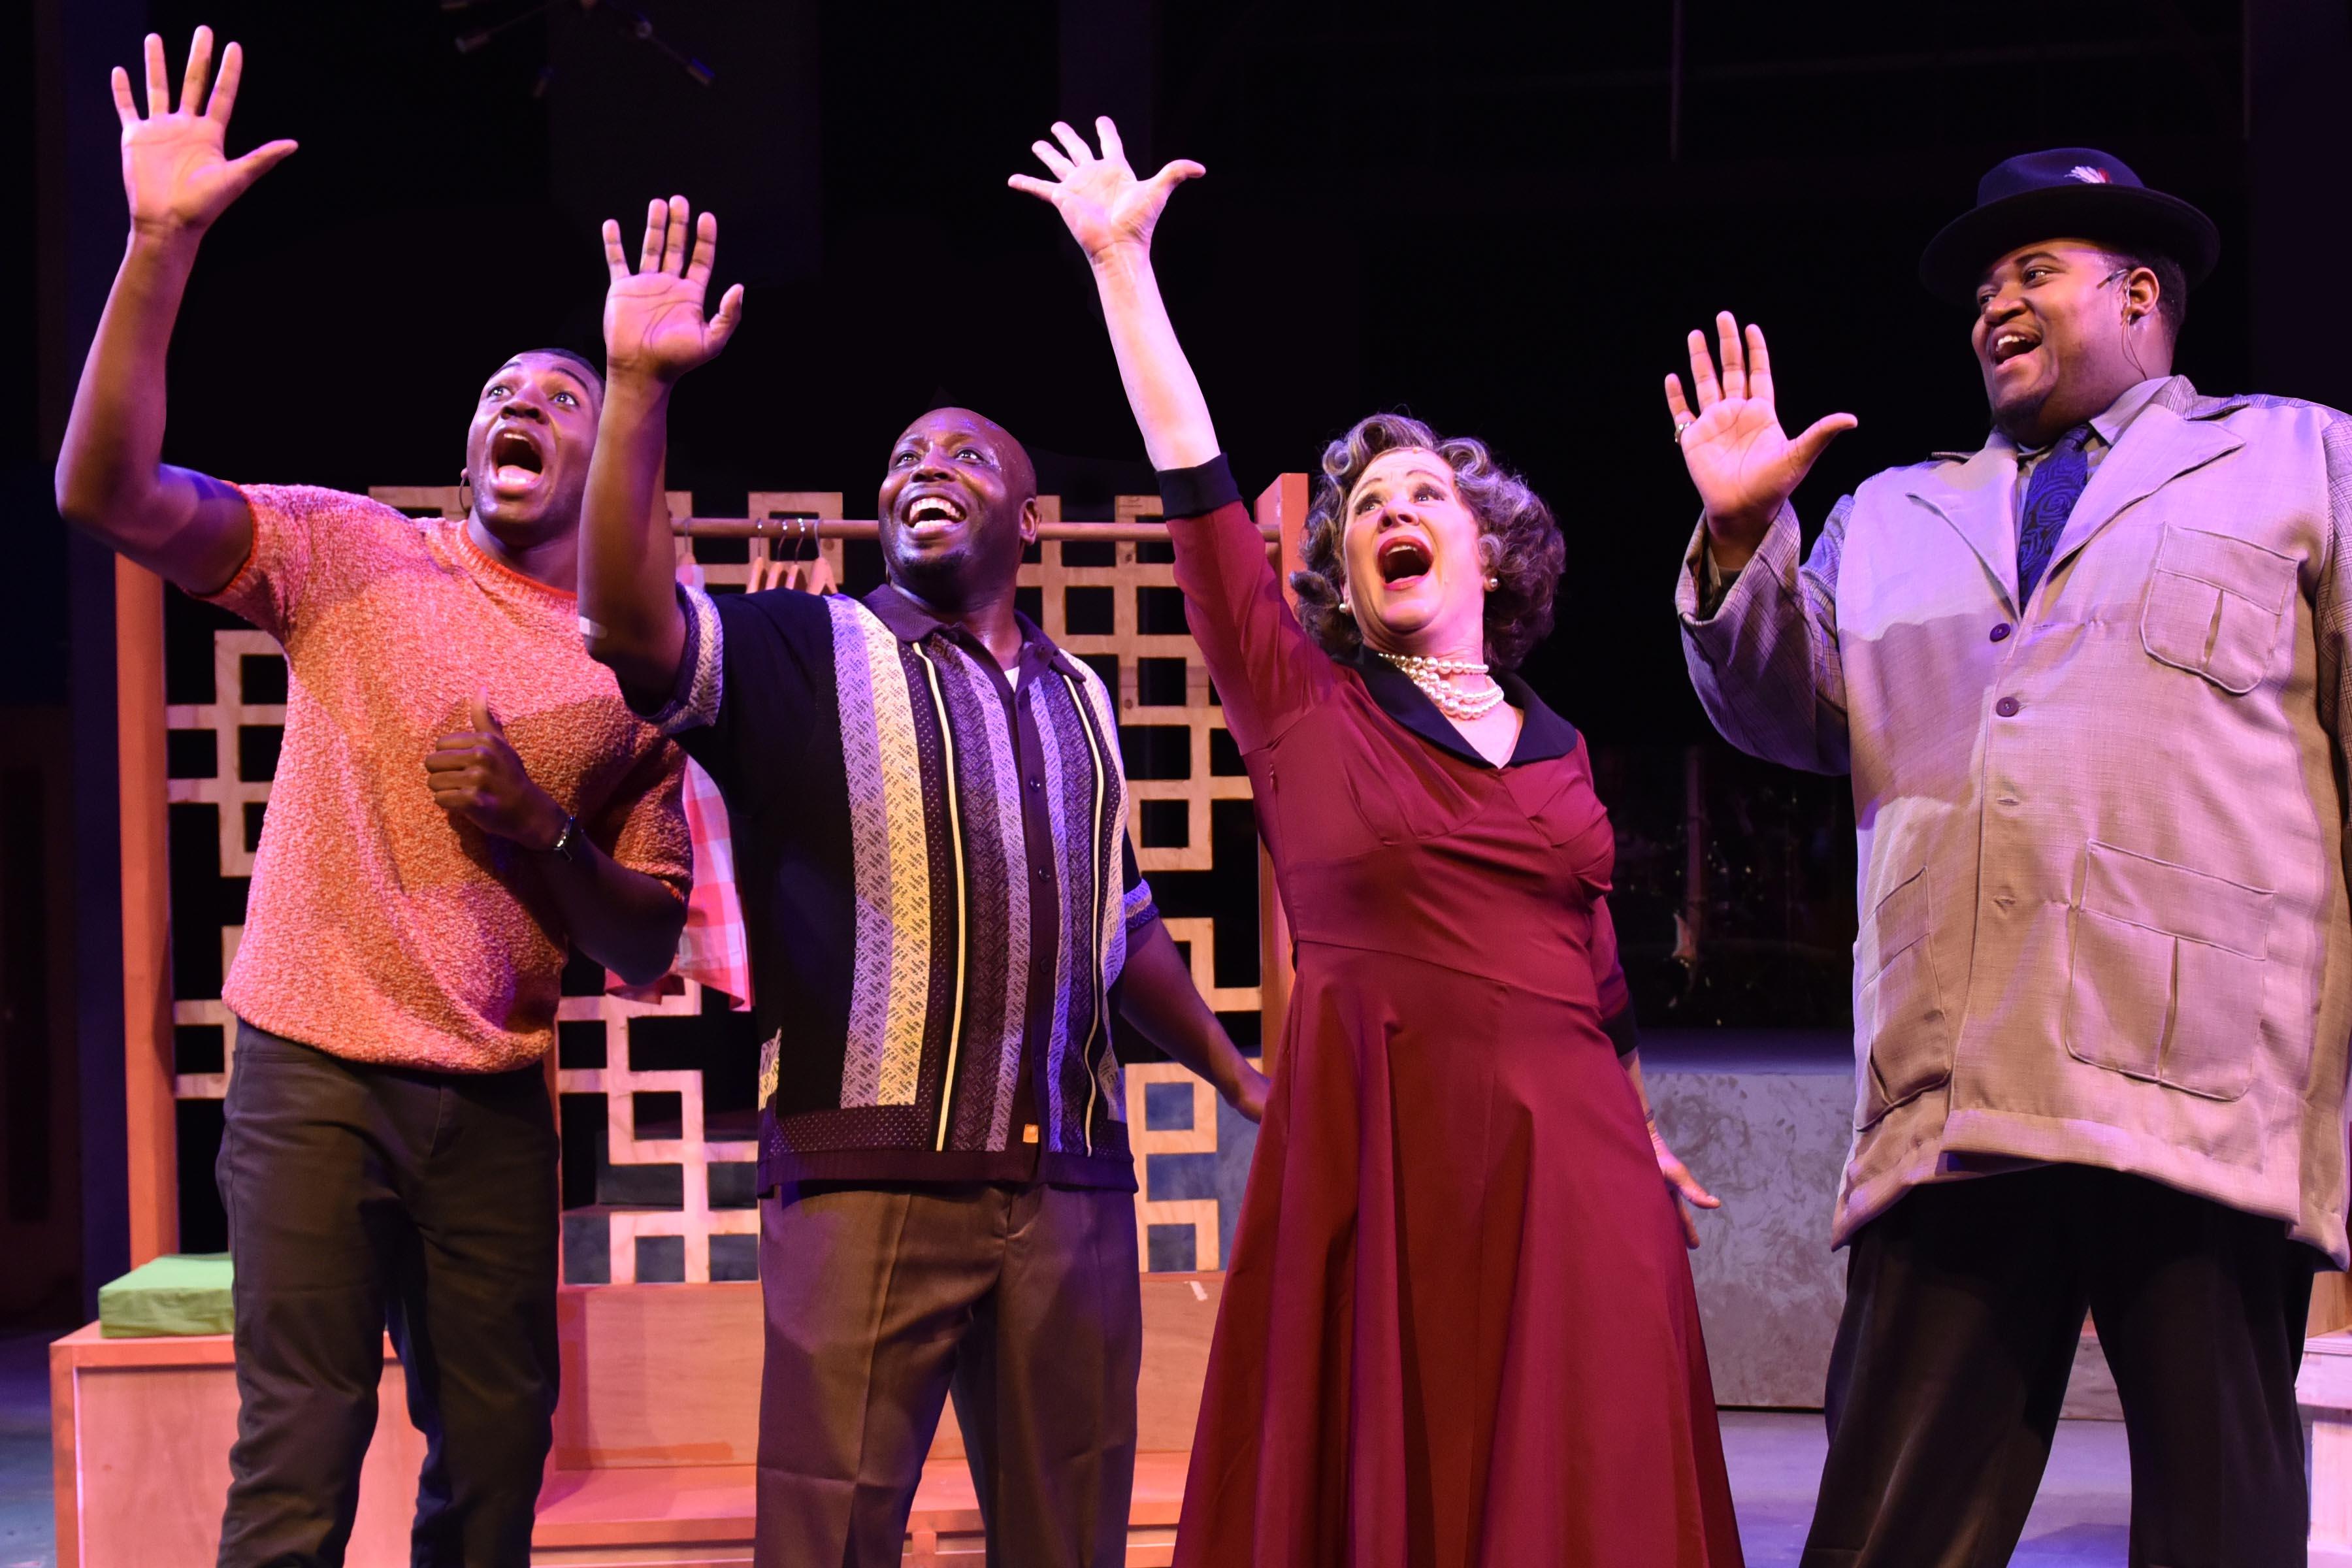 From left: Gilbert Domally, James Earl Jones II, Nancy Wagner and Lorenzo Rush, Jr. in “Memphis” from Porchlight Music Theatre. (Photo by Michael Courier)